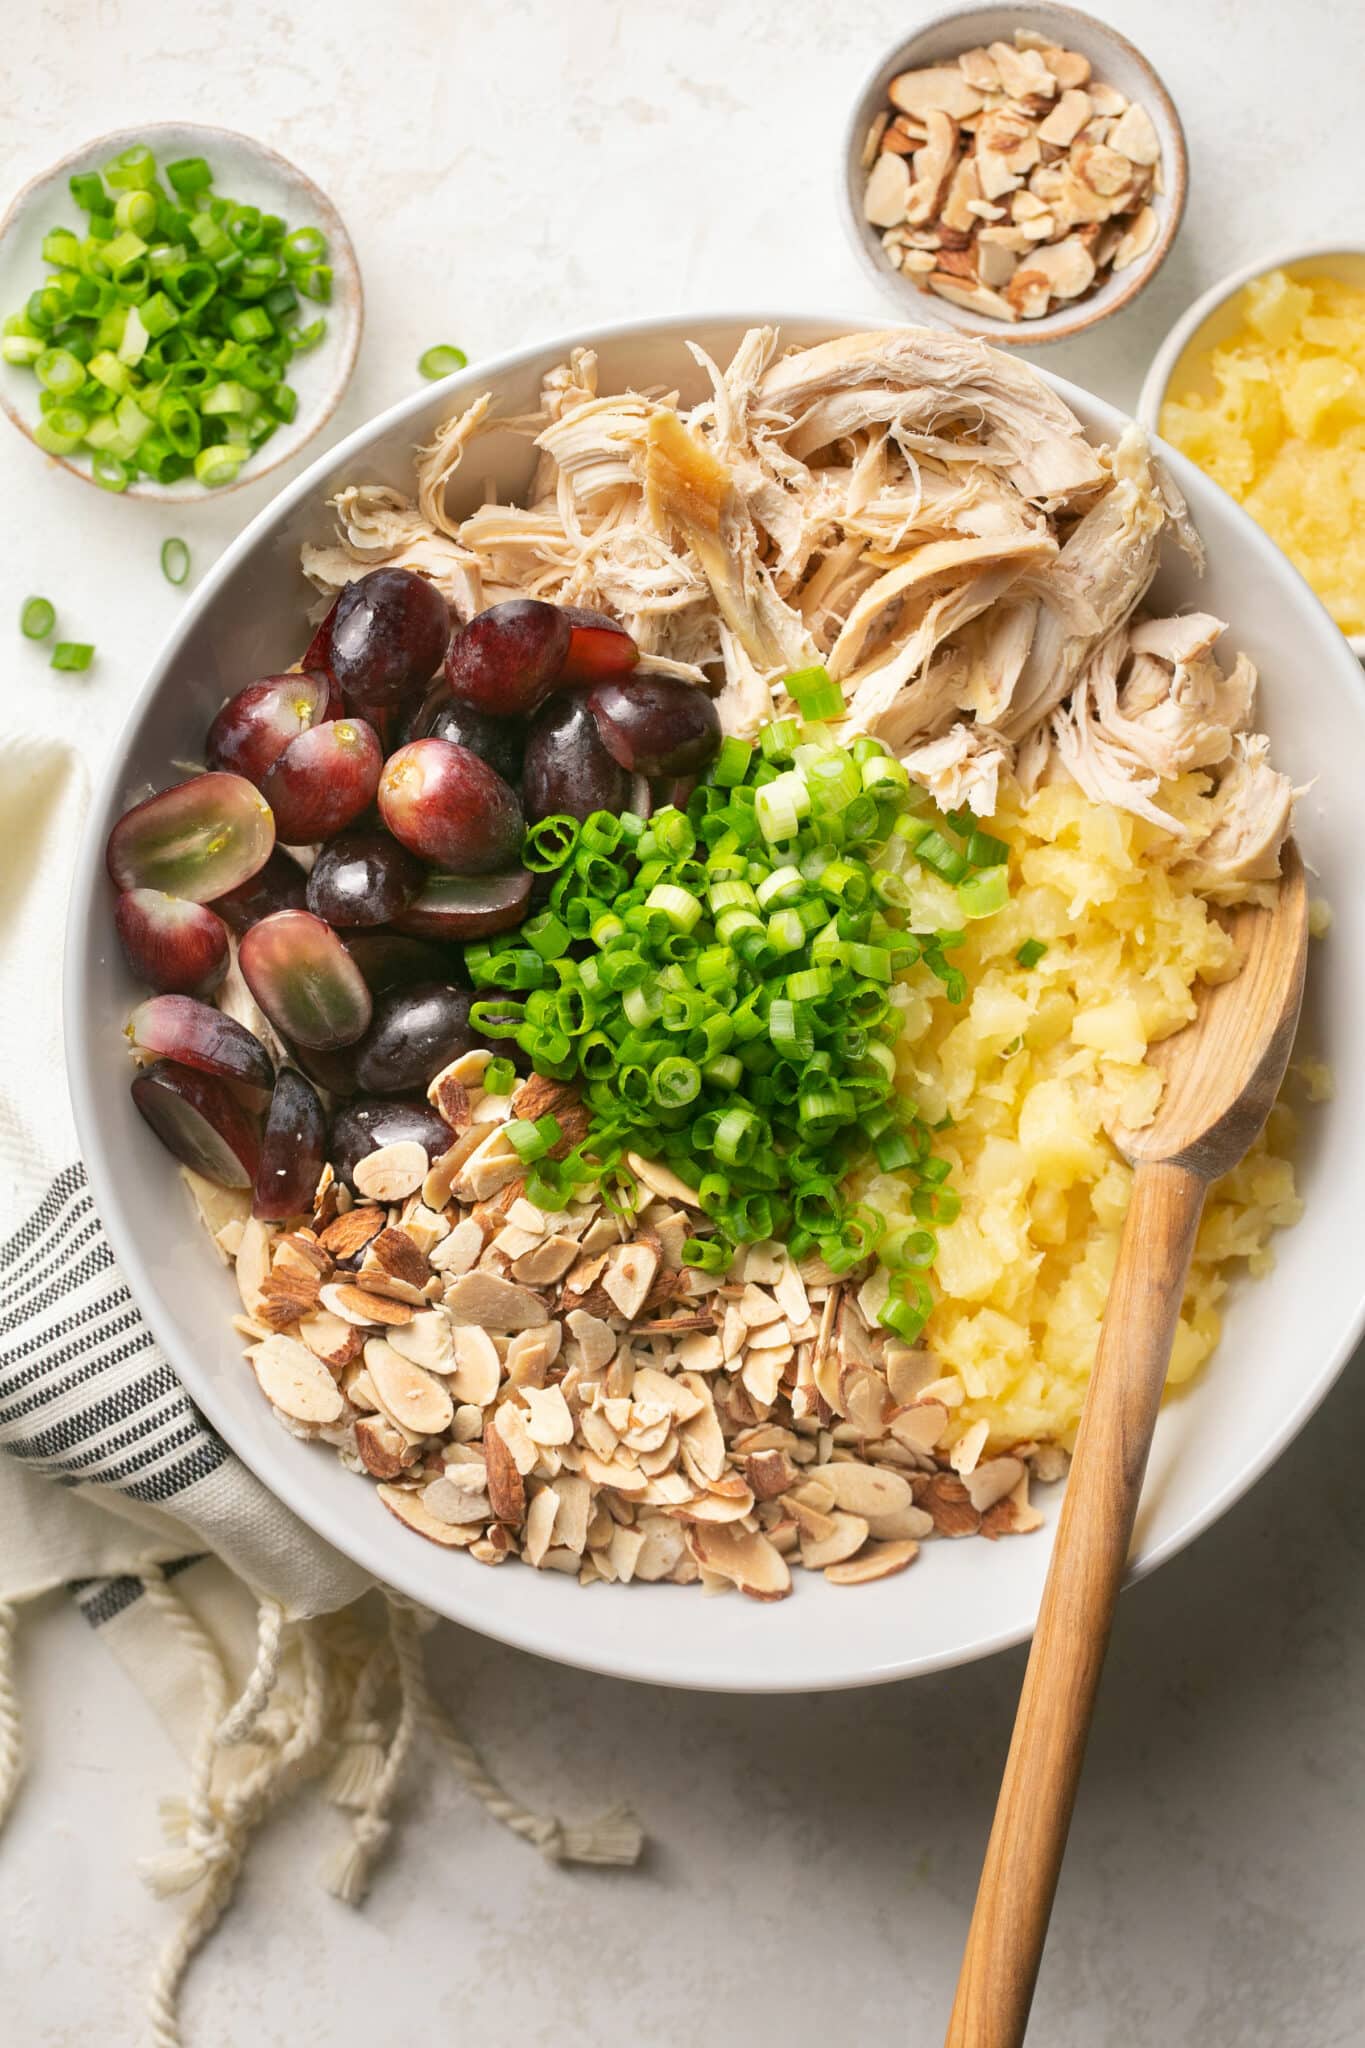 Shredded chicken, grapes, almonds and pineapple added to a large white bowl.